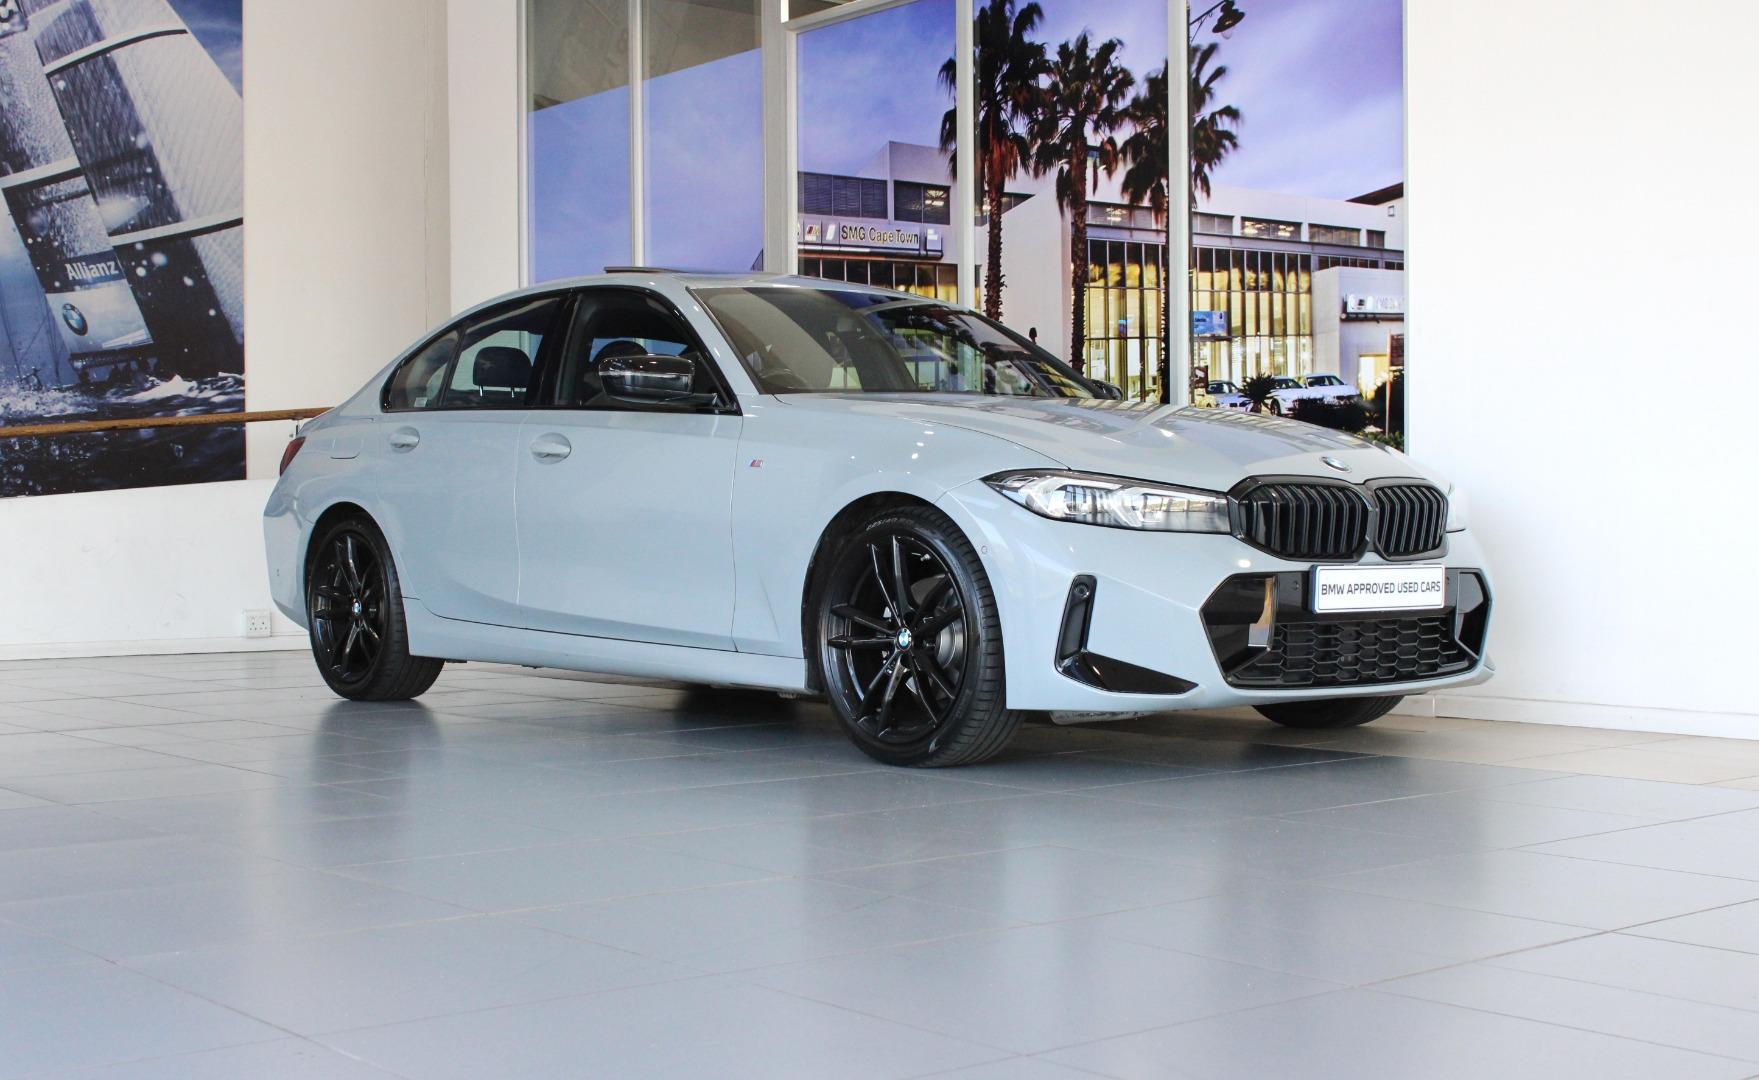 2022 BMW 320i M SPORT AT (G20)  for sale - SMG12|USED|115371